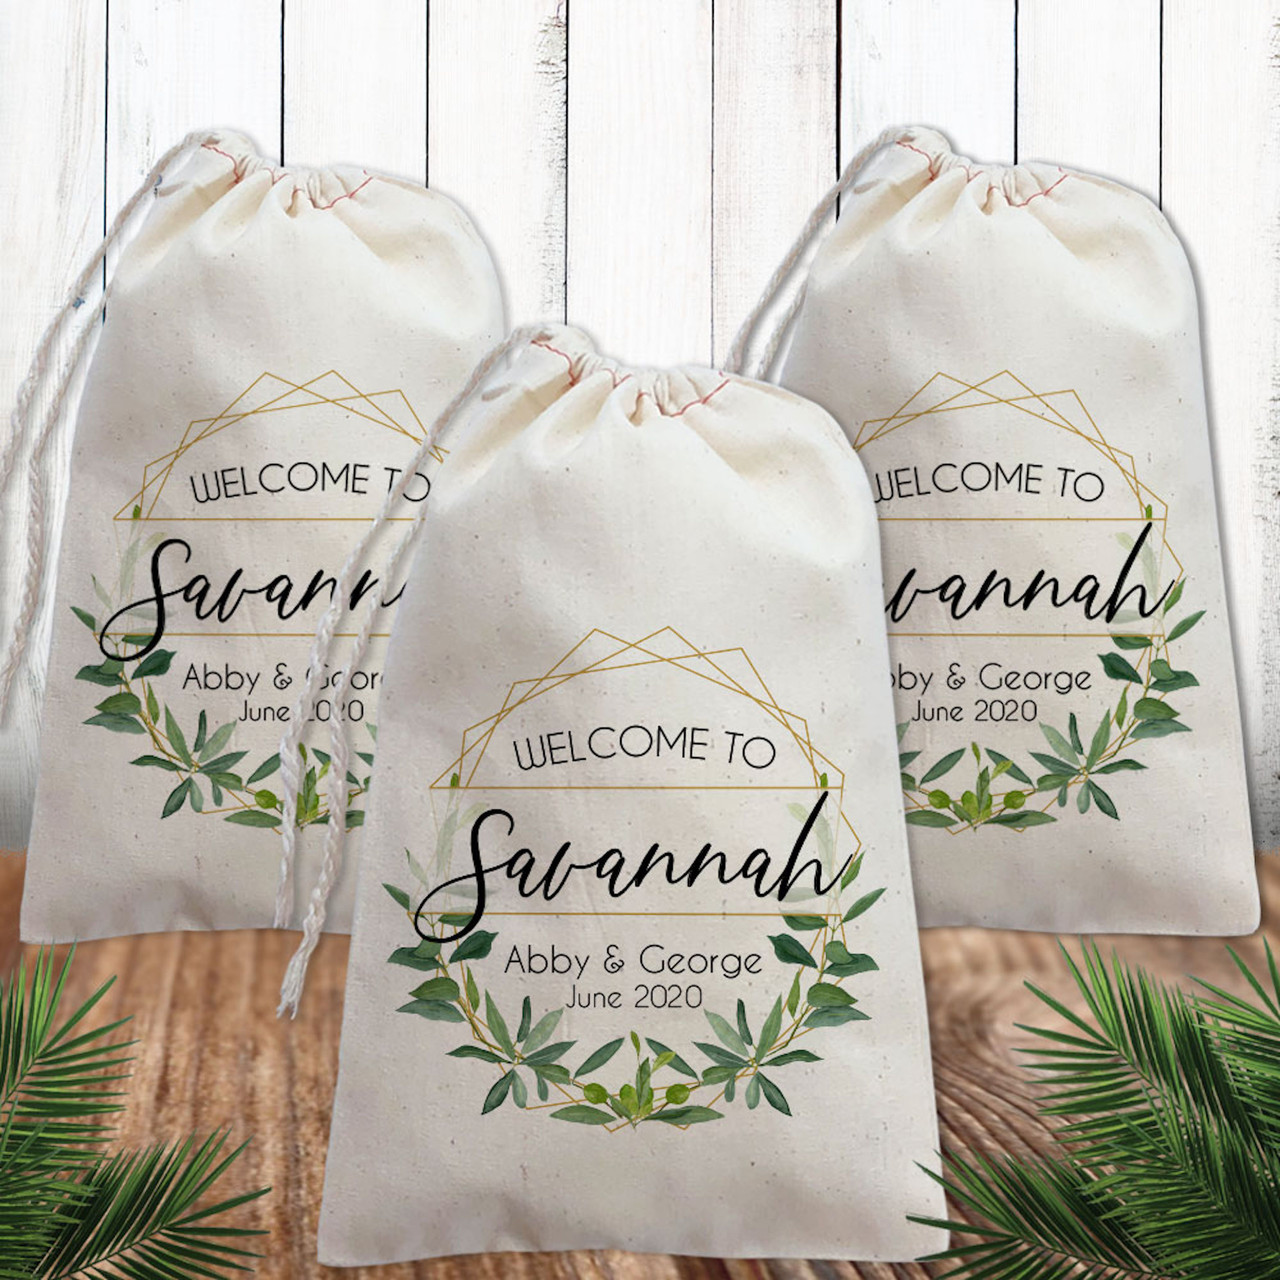  30 Pieces Wedding Welcome Bags Bulk Thank You for Celebrating  with Us Paper Bags with Handles Wedding Favor Gift Bags for Guests Wedding  Birthday Baby Shower Favors Supplies, 8 x 4